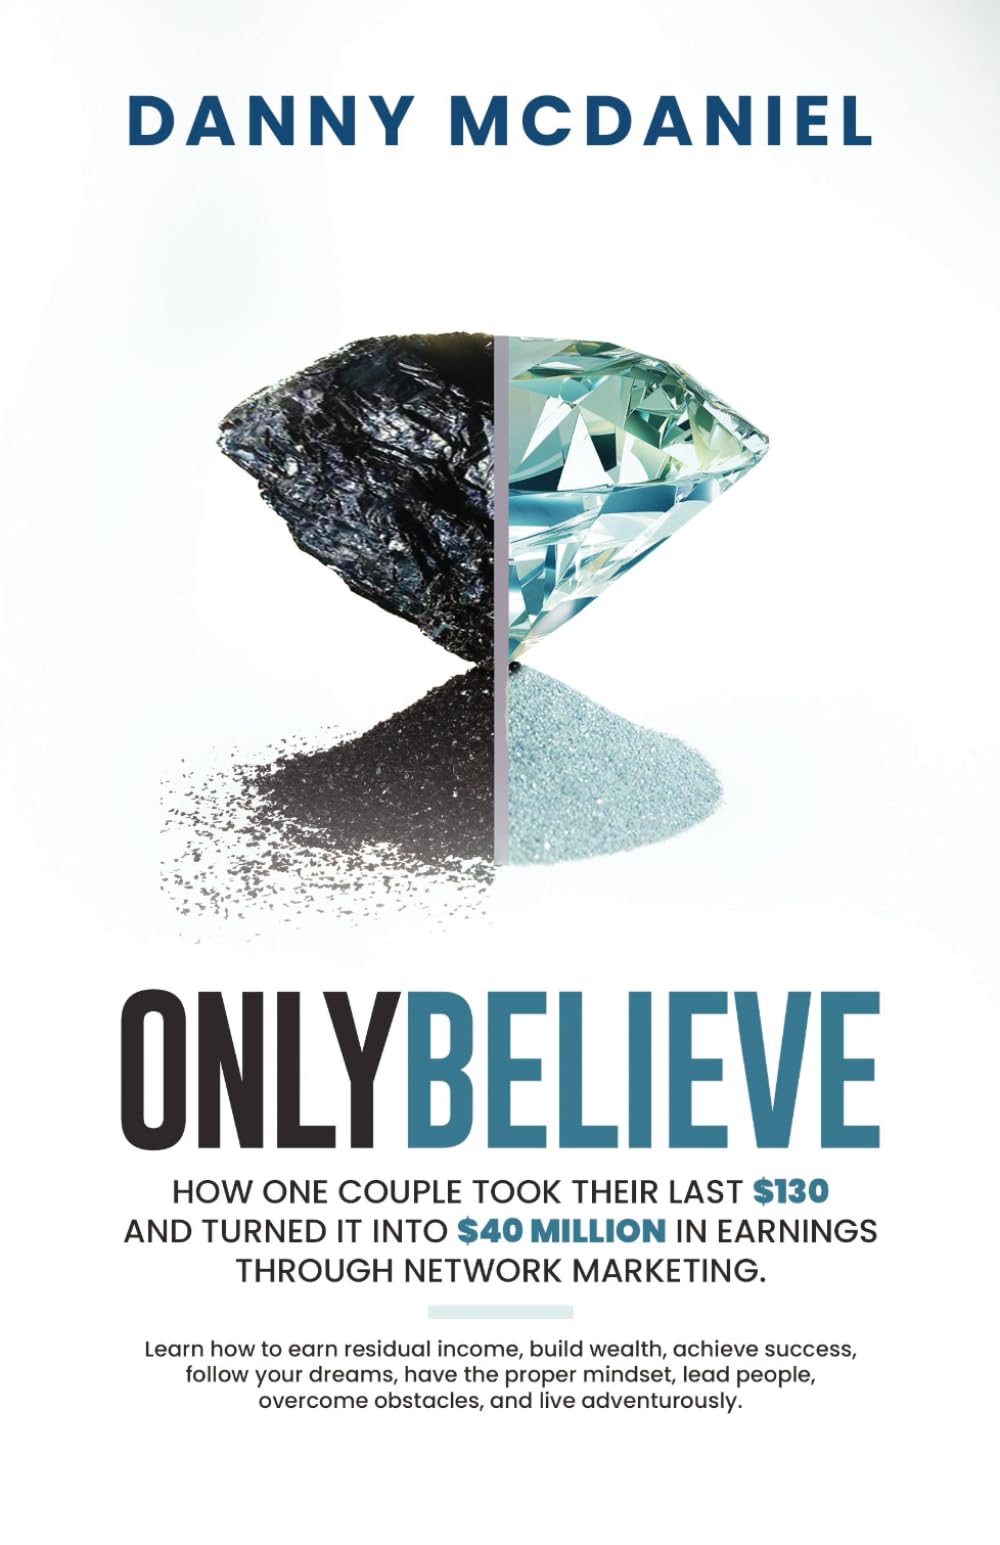 Only Believe: Learn how to earn residual income, buildwealth, achieve success, follow your dreams, have the proper mindset, lead people, overcome obstacles, and live adventurously.